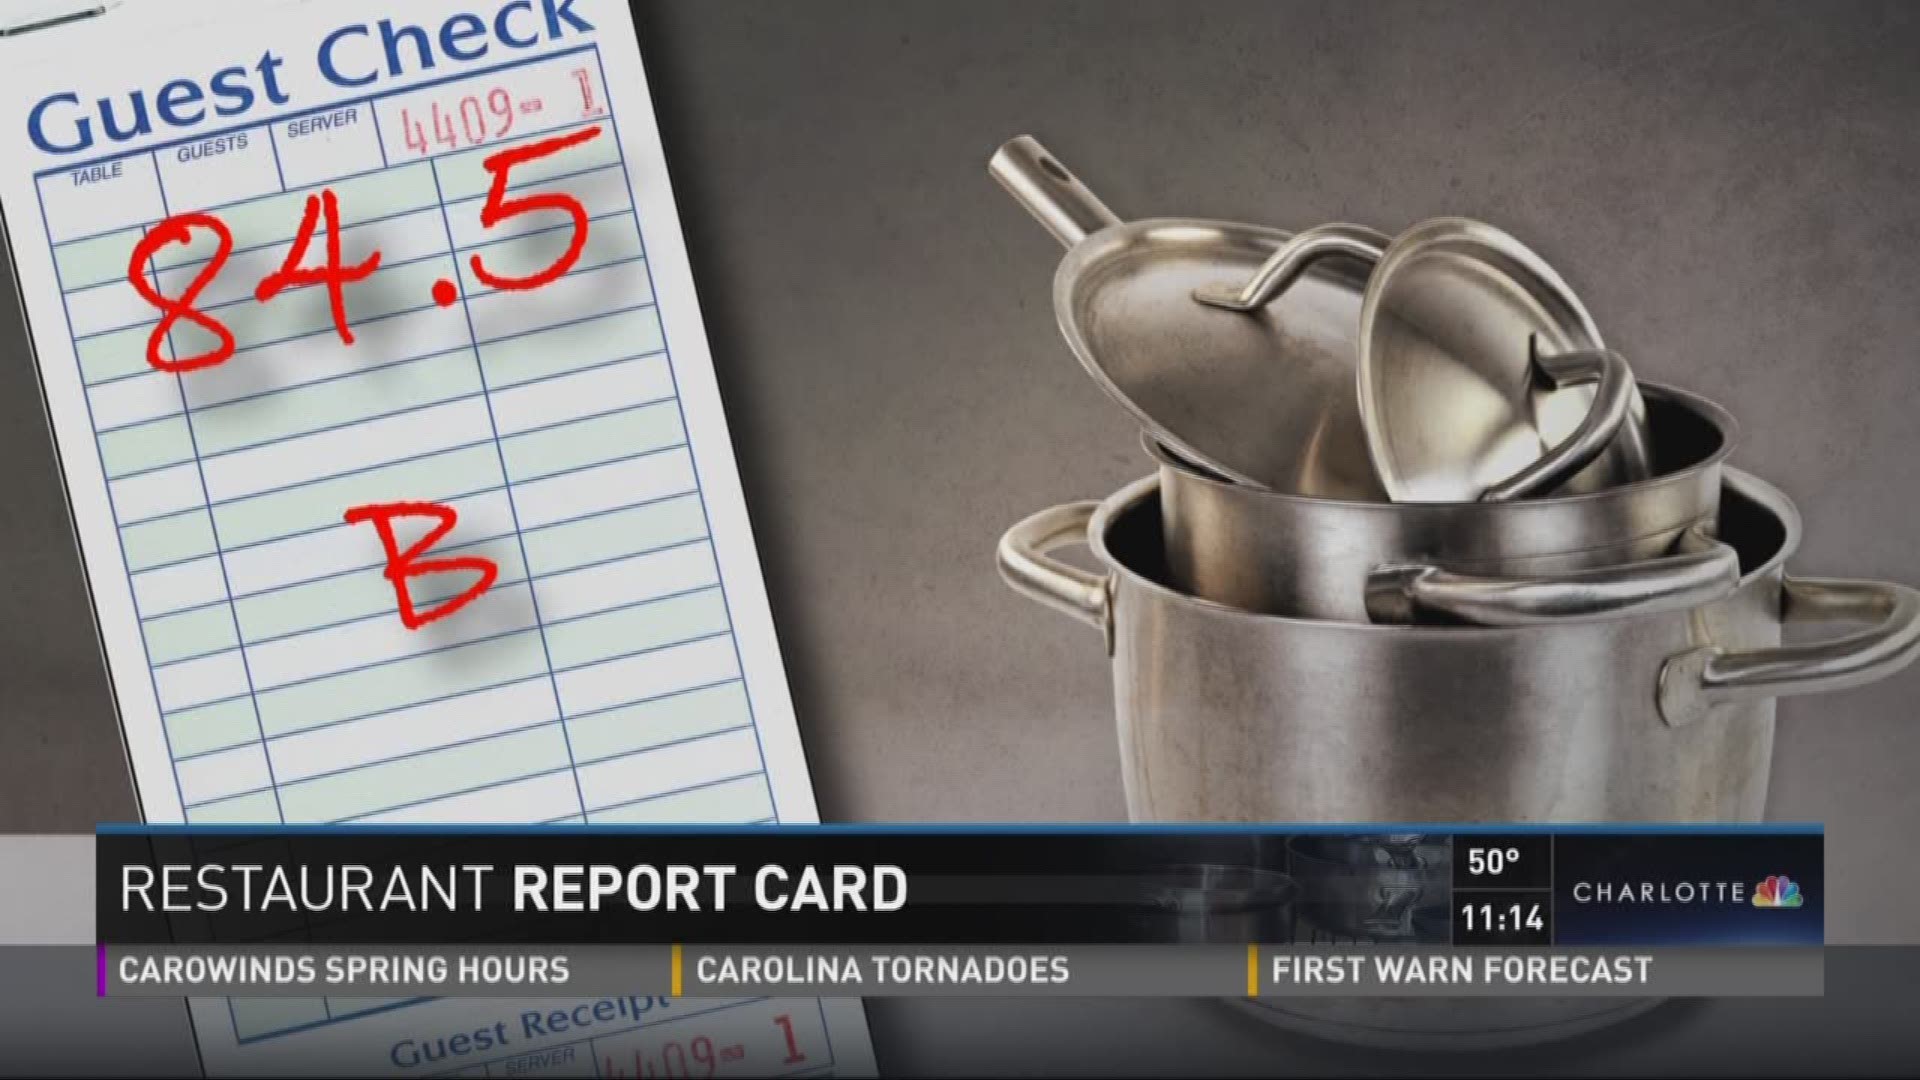 Bill McGinty has the latest for this week's Restaurant Report Card.